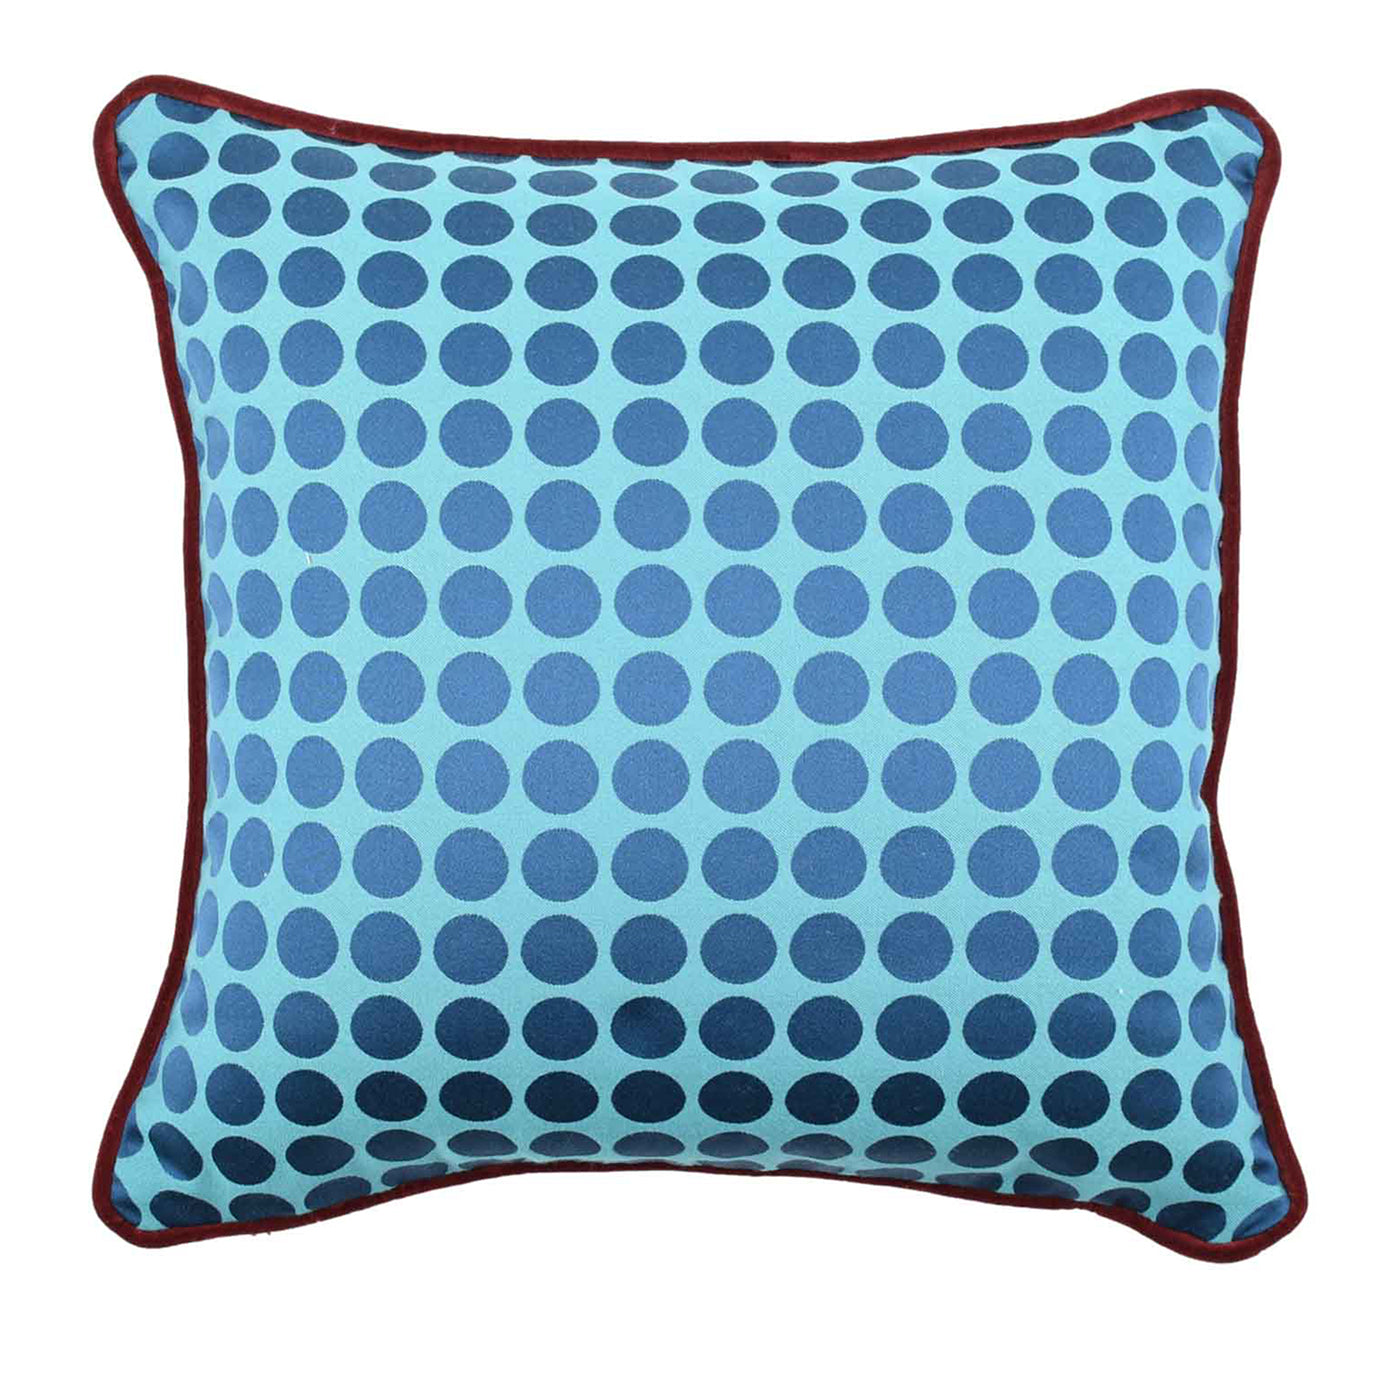 Turquoise and Blue Carrè Cushion in polka dots jacquard fabric - Main view